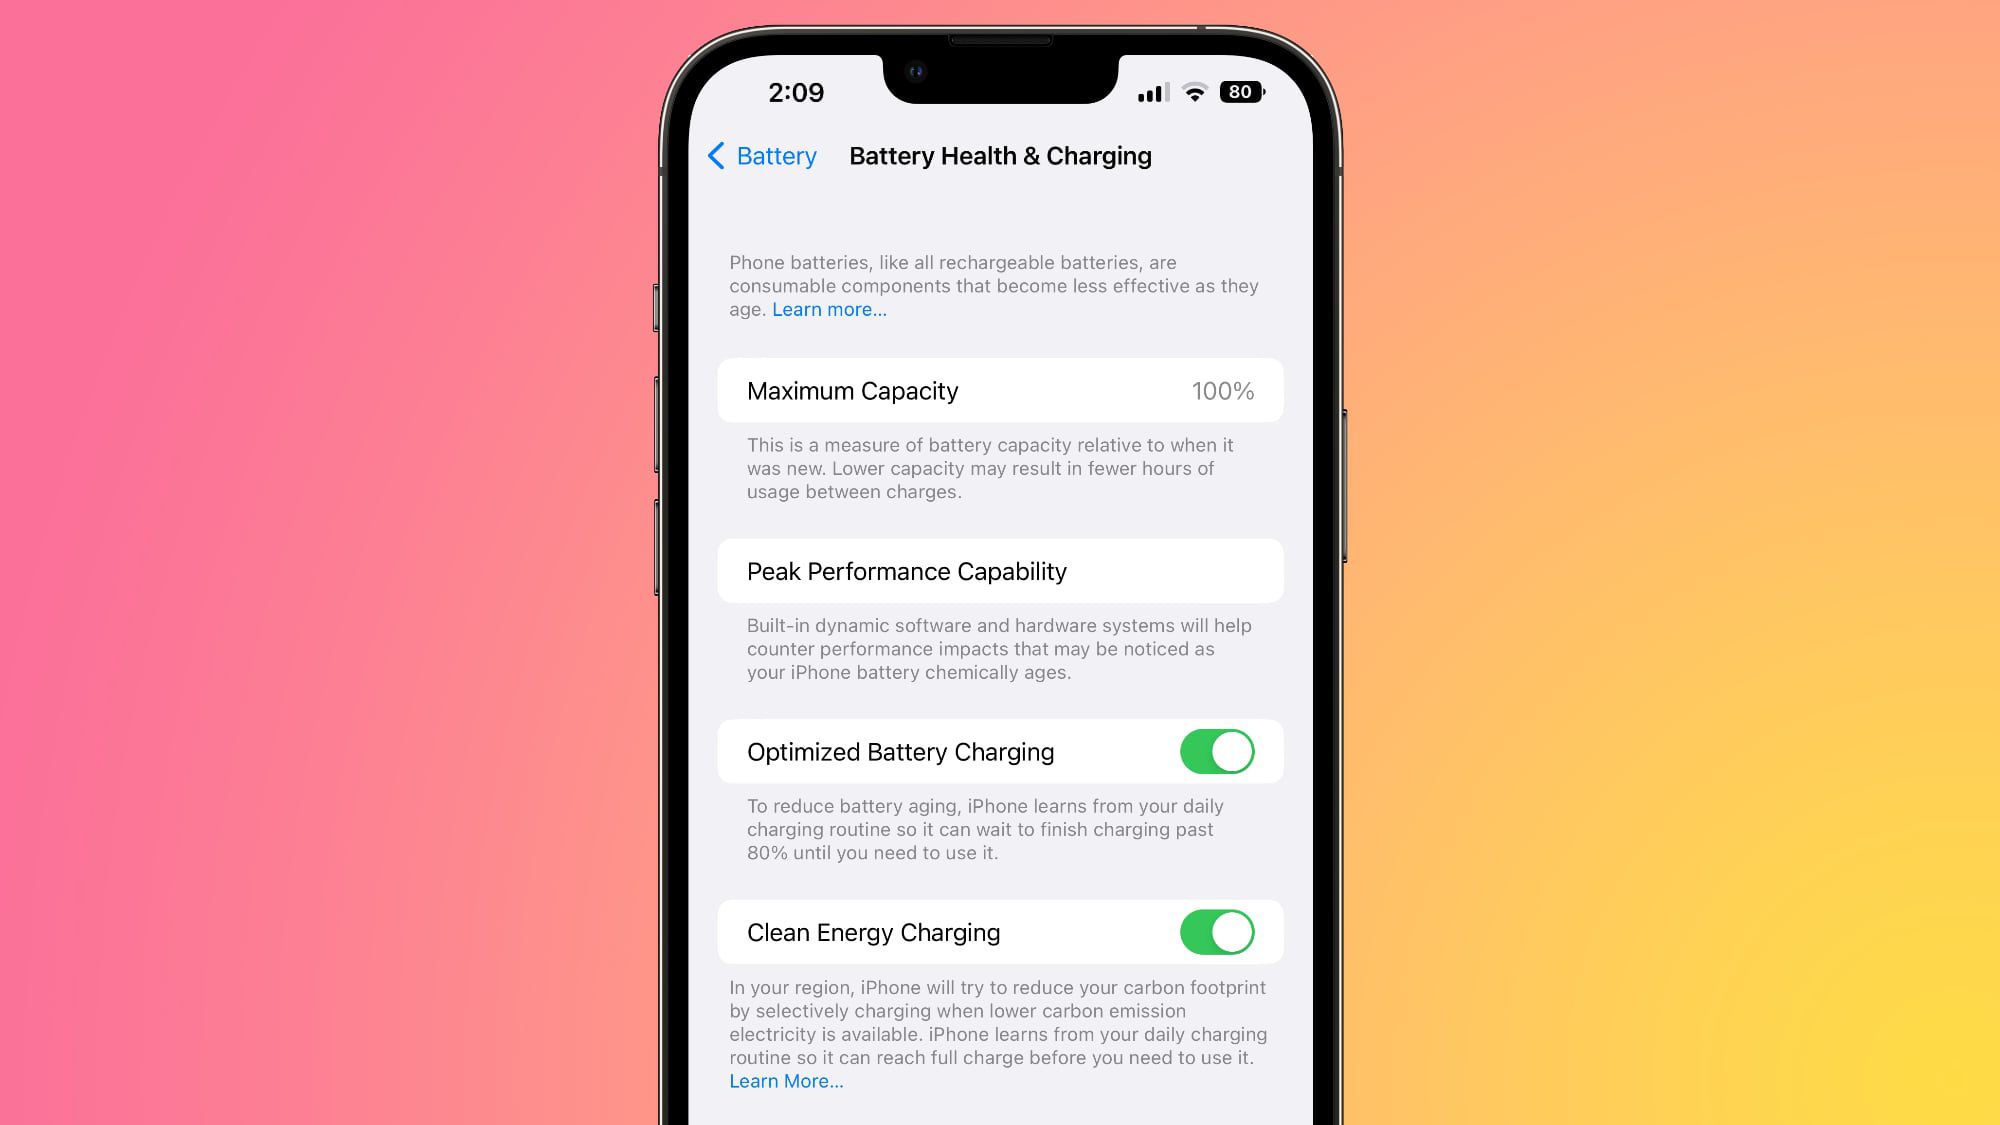 Apple Shares More Details on iOS 16.1 Clean Energy Charging Feature